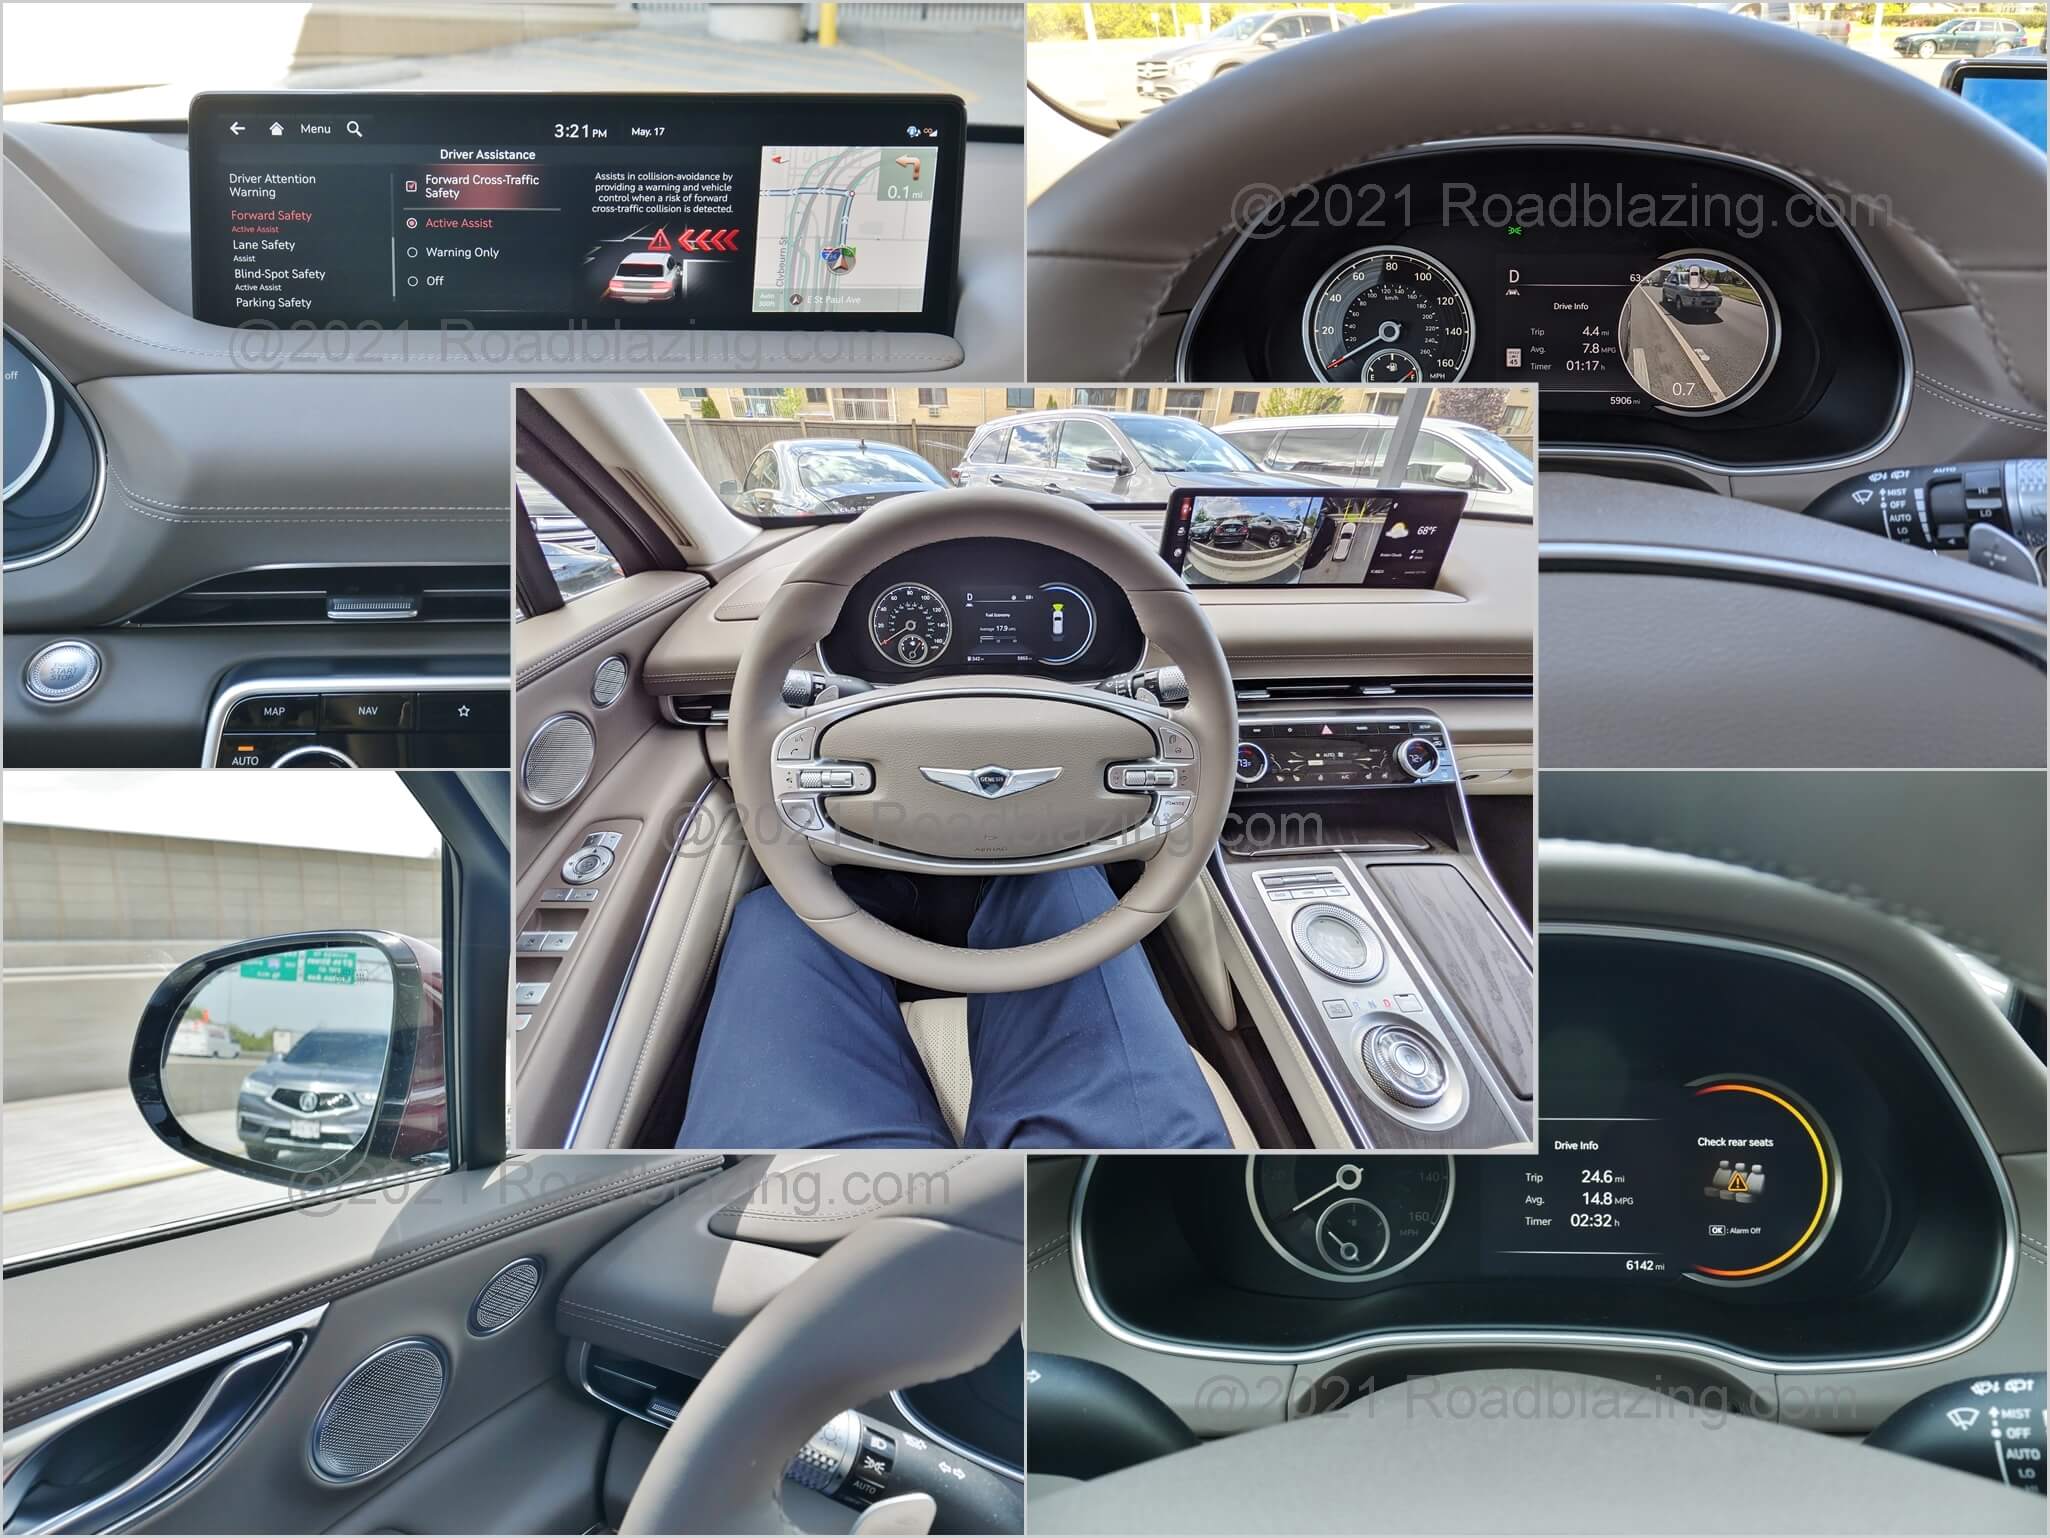 2021 Genesis GV80 2.5T AWD: comprehensive Level 2.0 semi autonomous driver assistance suite, with a variety of customizable settings